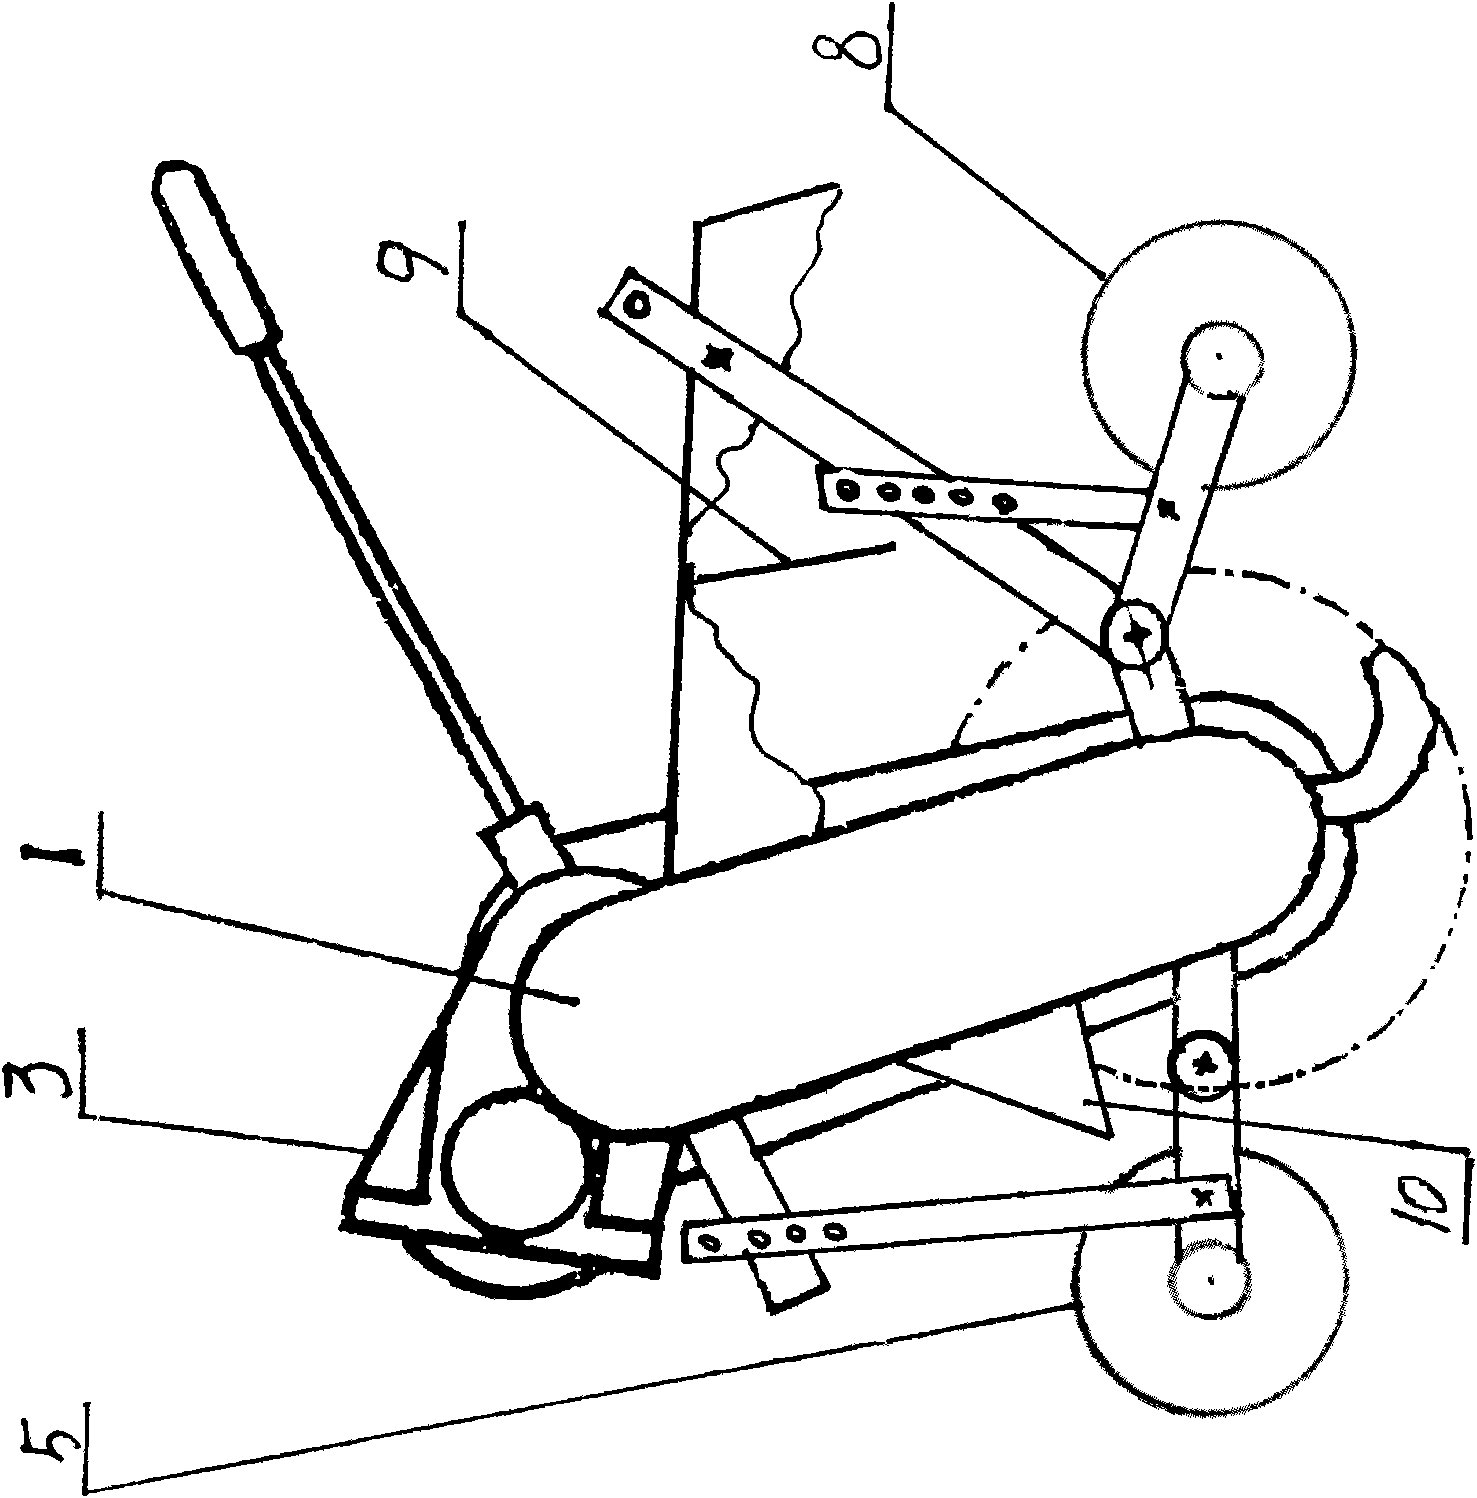 Reversal stubble burying rotary cultivator